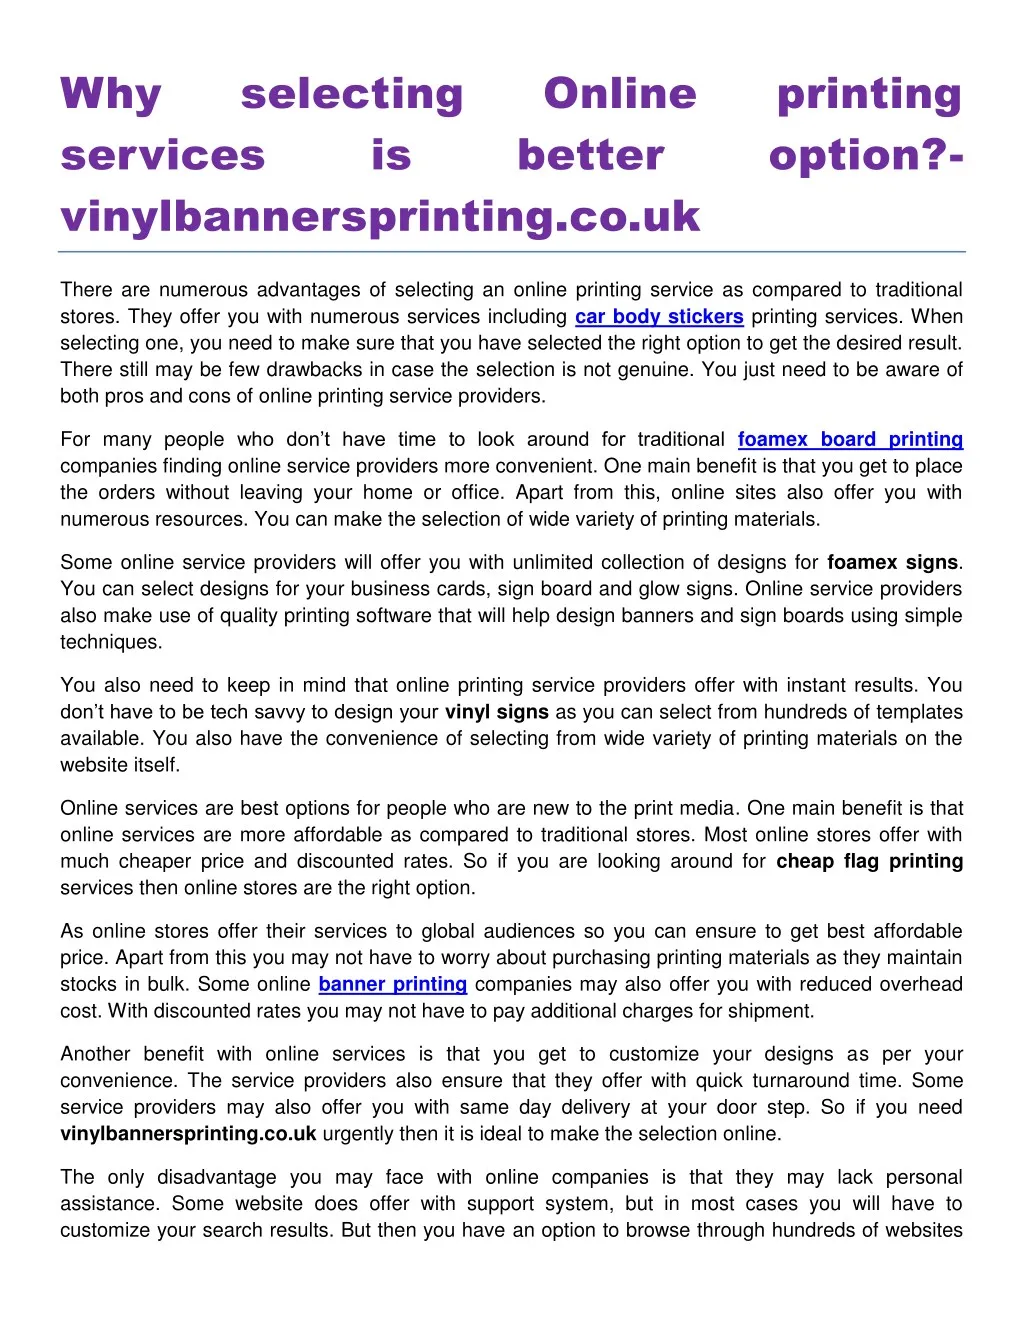 why services vinylbannersprinting co uk